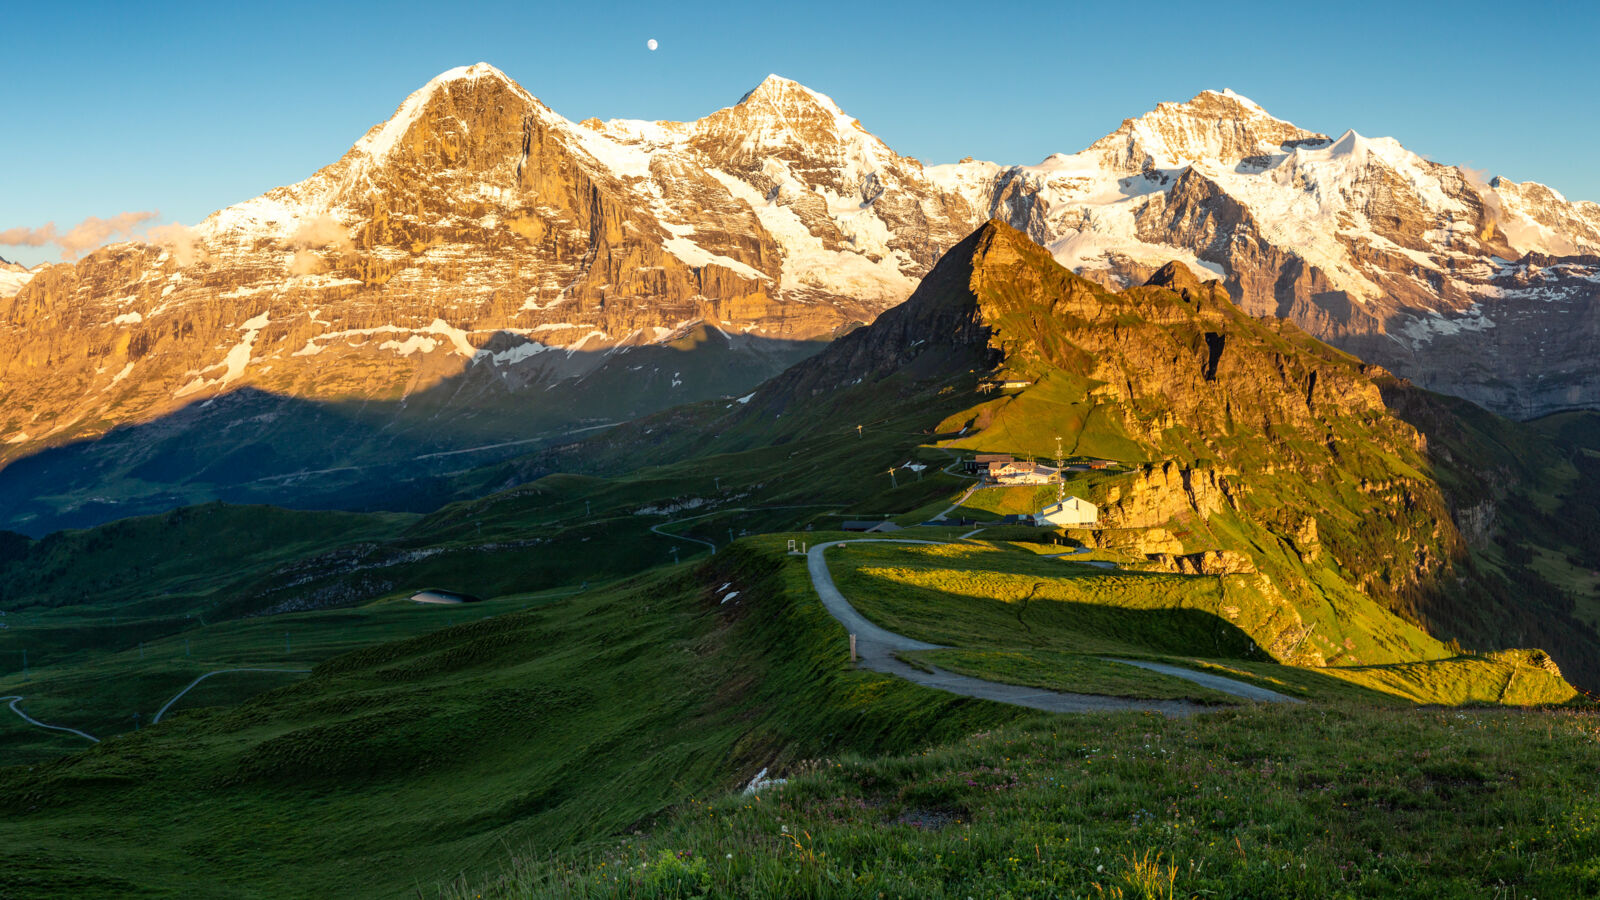 Triumvirate of the Eiger, Mönch and Jungfrau mountains